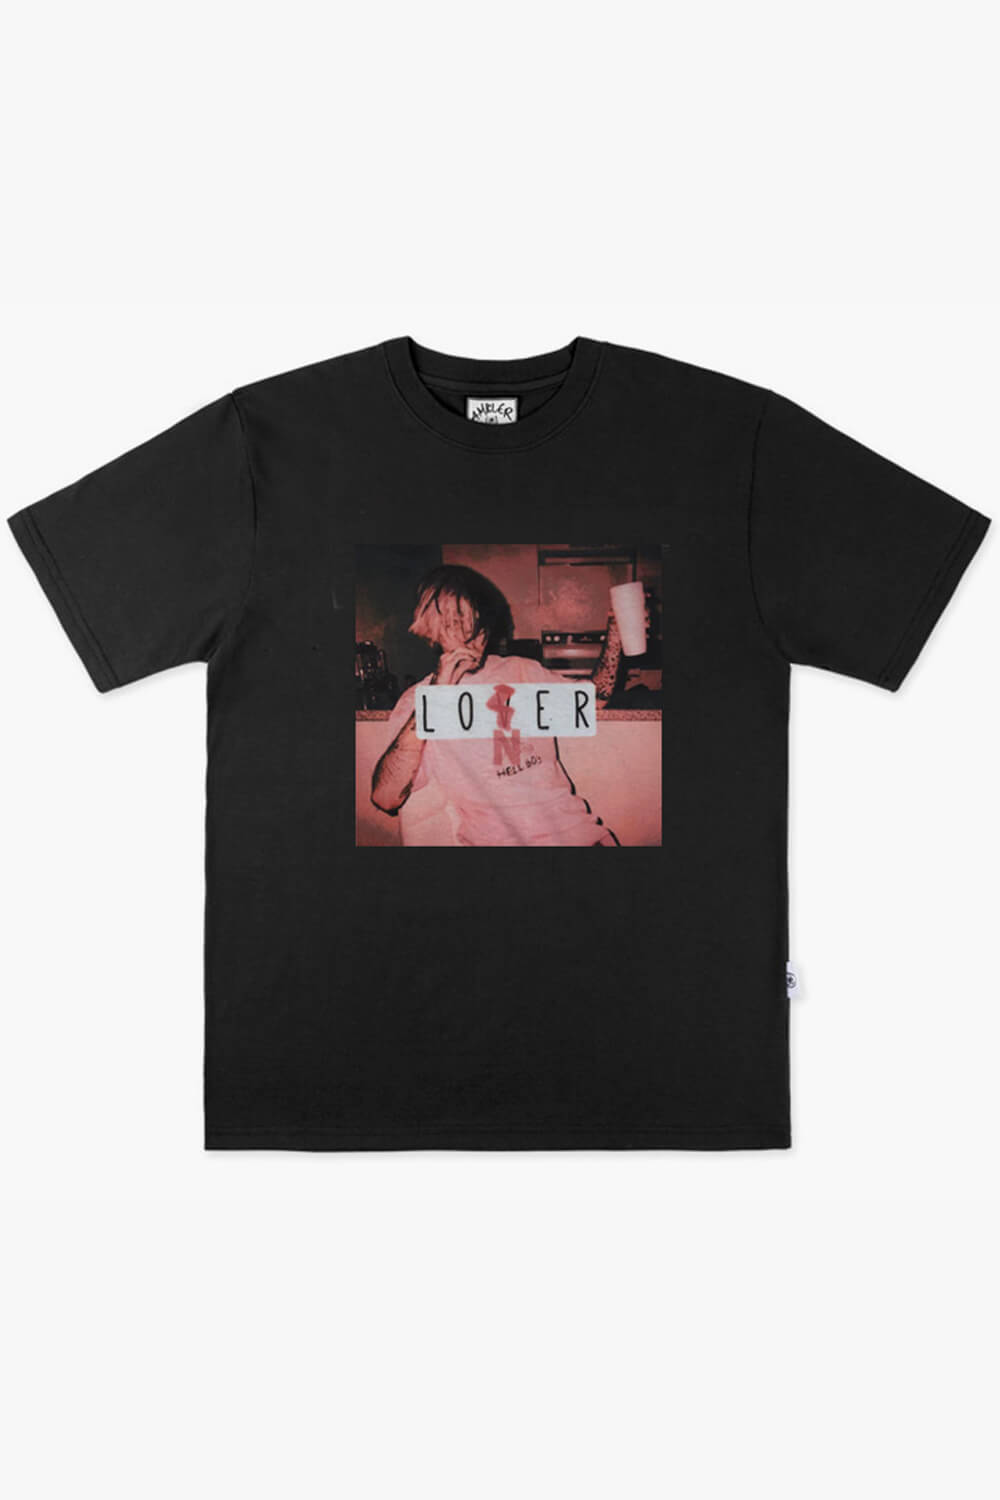 Anxiety Aesthetic Lil Peep Loner T-Shirt